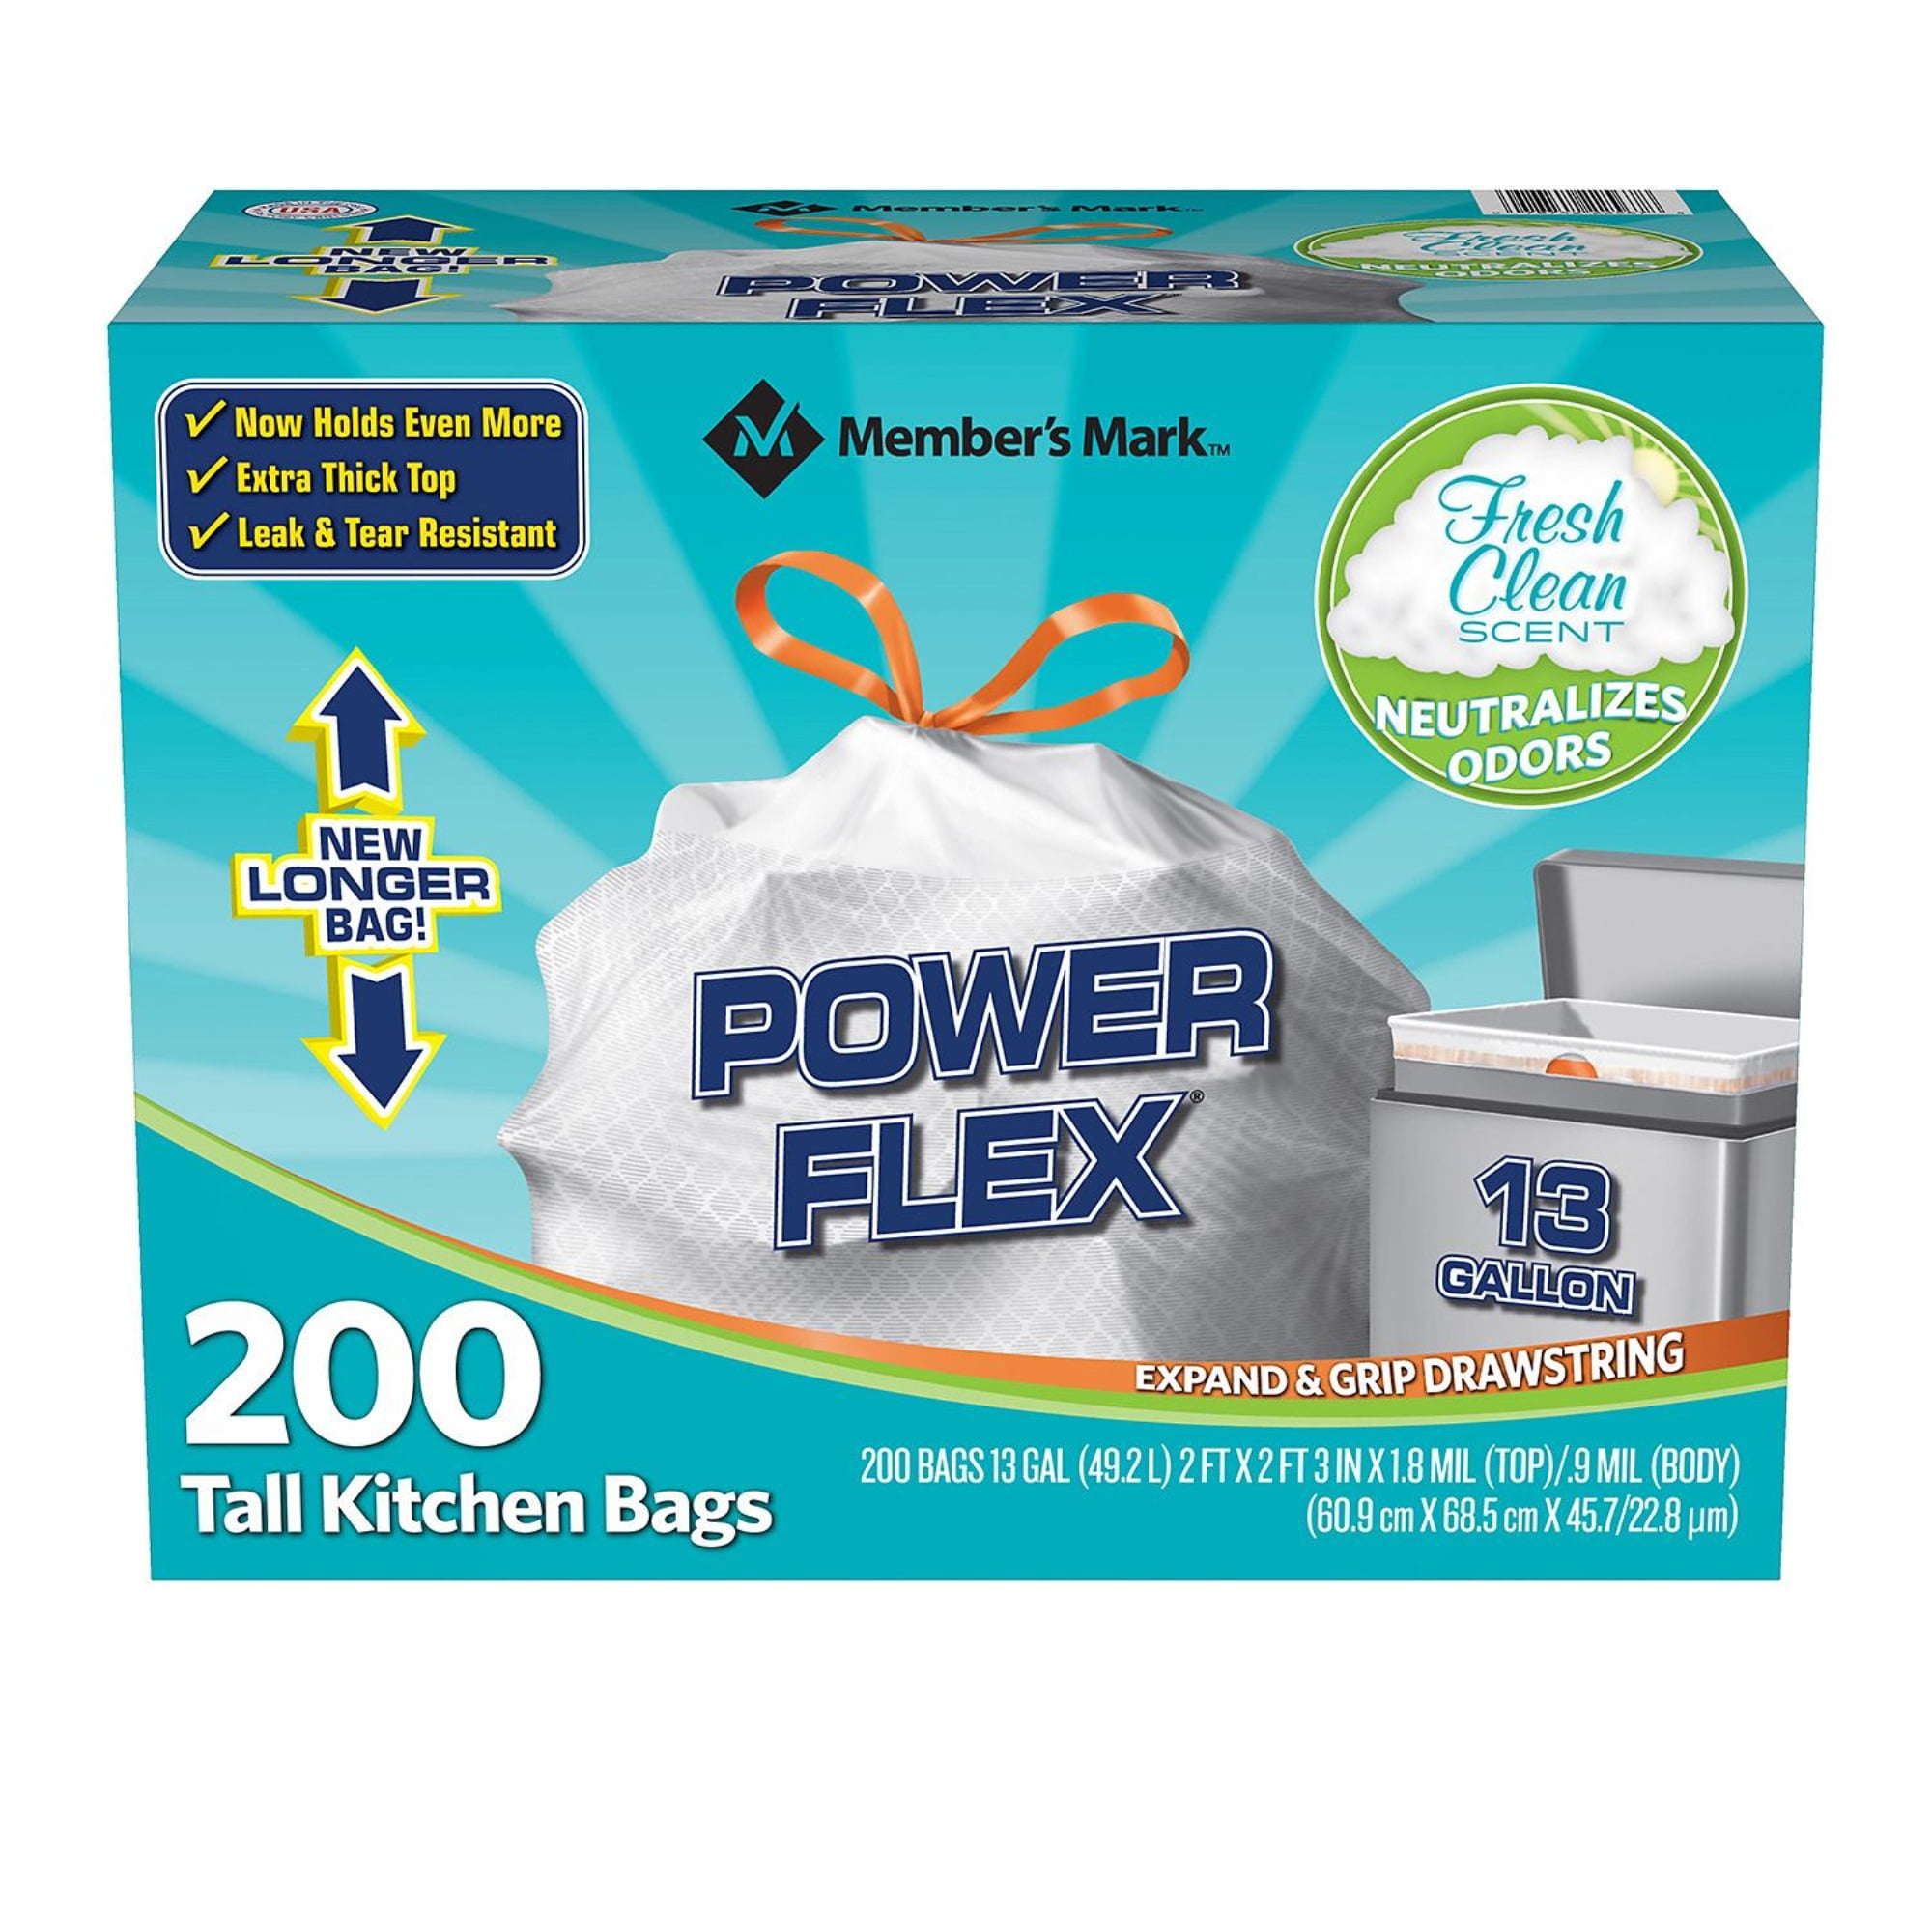 Clear 100 Counts/ 2 Rolls PGS 2 Gallon Small Trash Bags